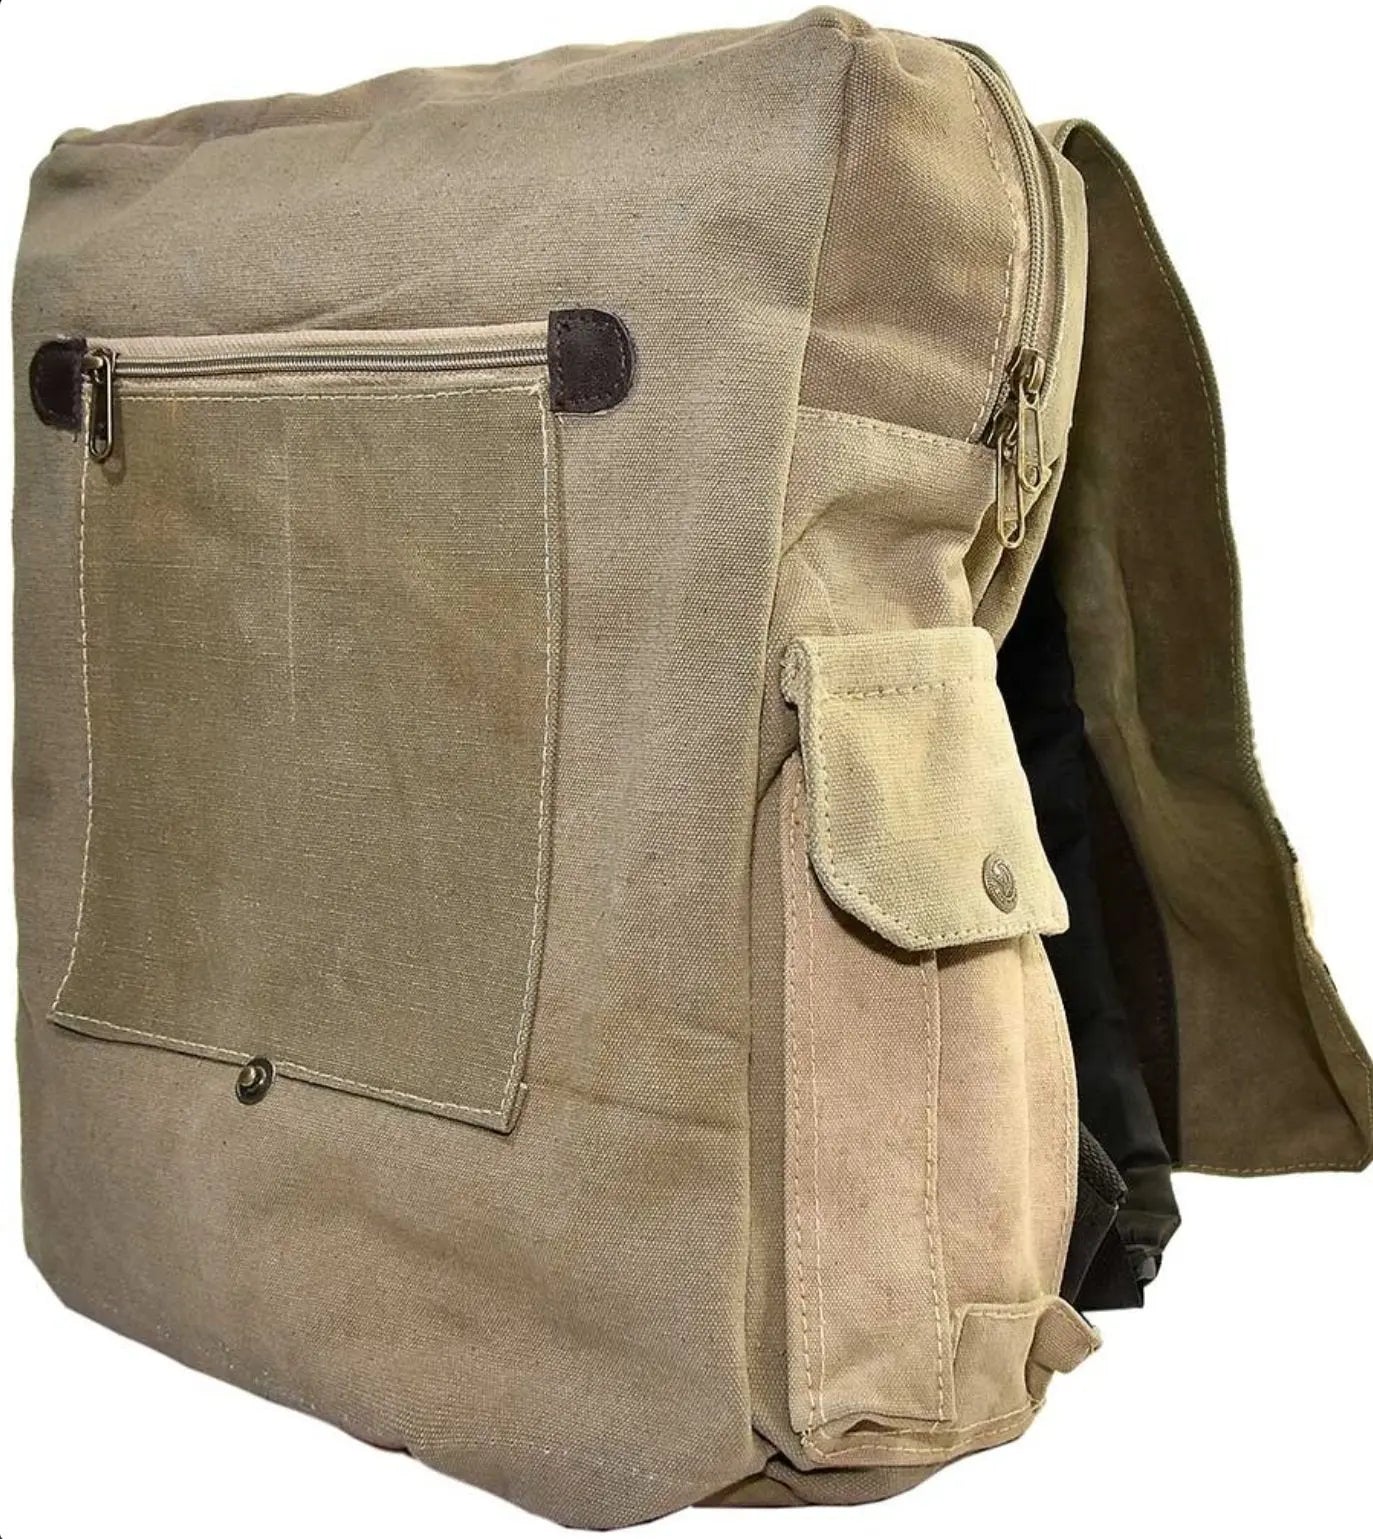 Backpack | Recycled Military Tents Vintage Addiction